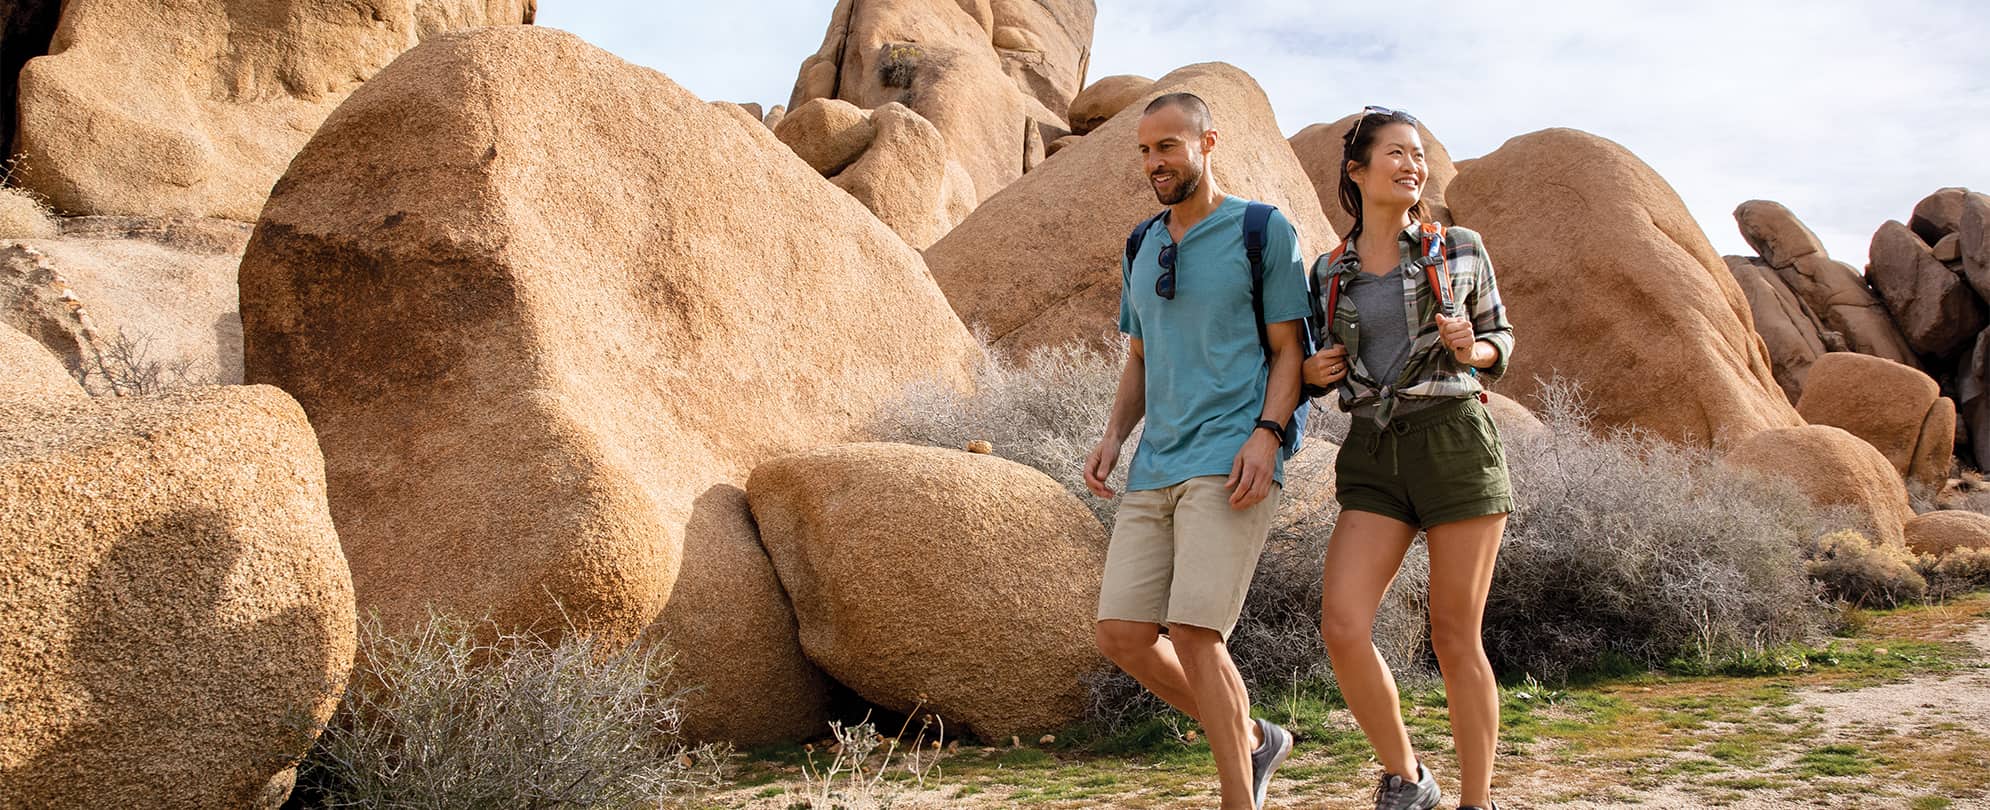 Man and woman wearing backpacks hike along a trail surrounded by large boulders during their WorldMark by Wyndham vacation.